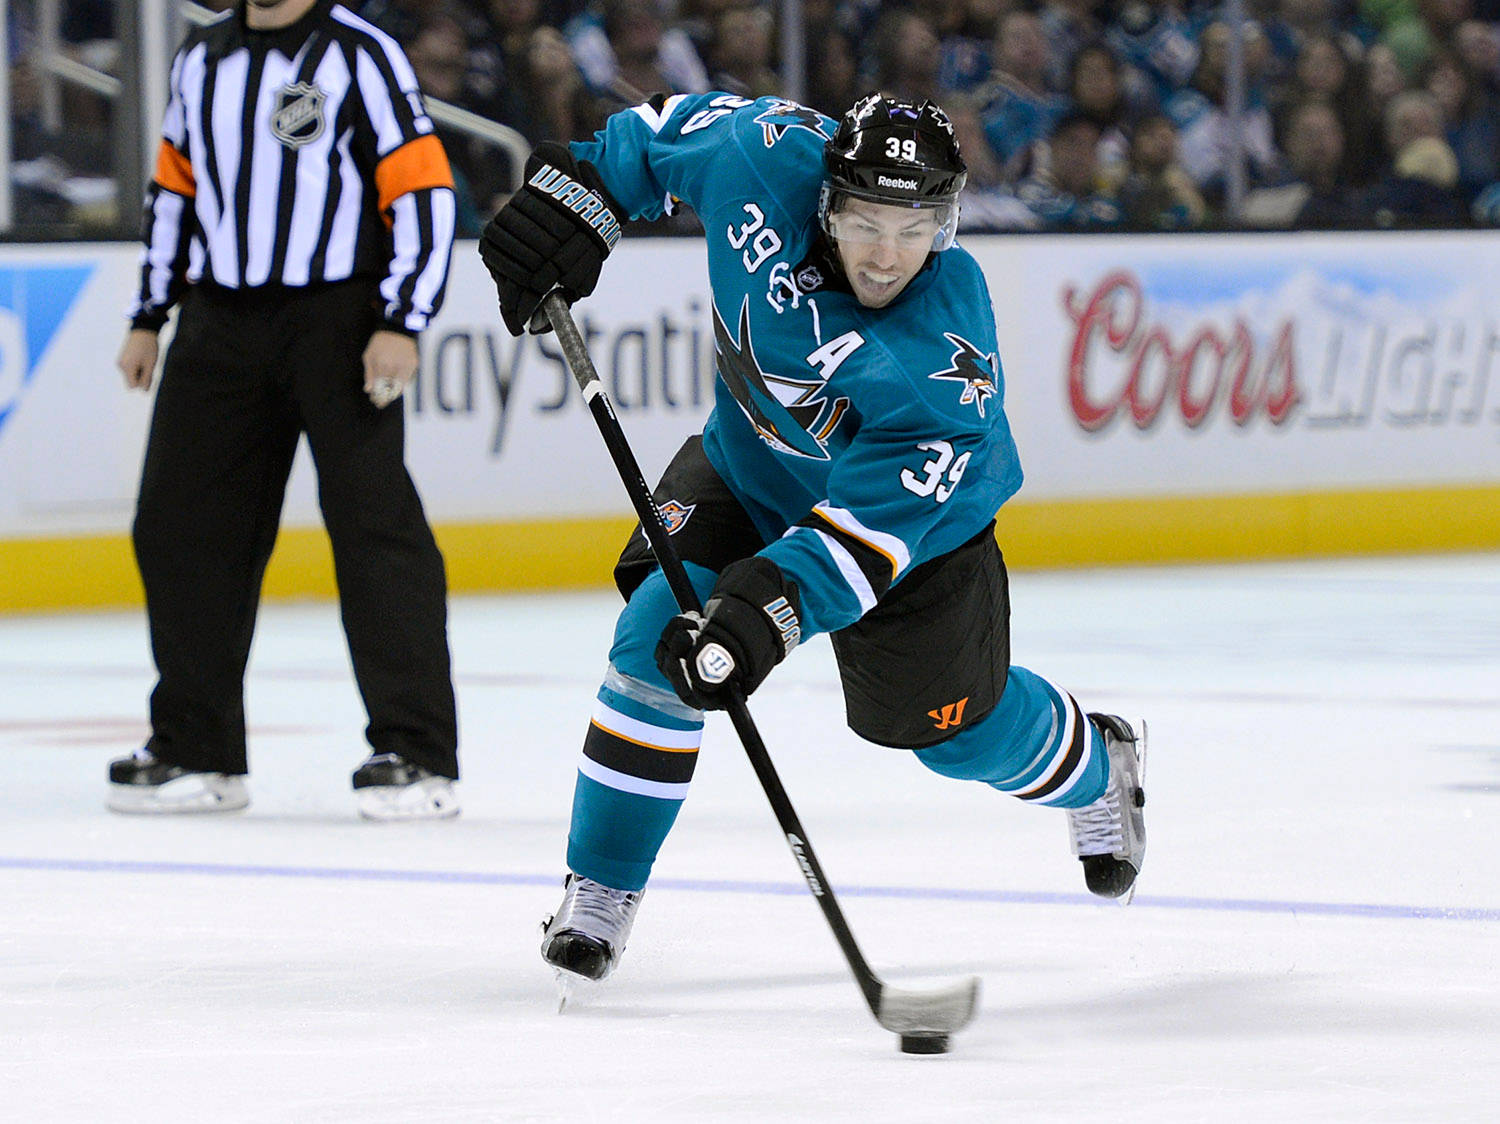 Playing Canadian Professional Ice Hockey Center Logan Couture Wallpaper